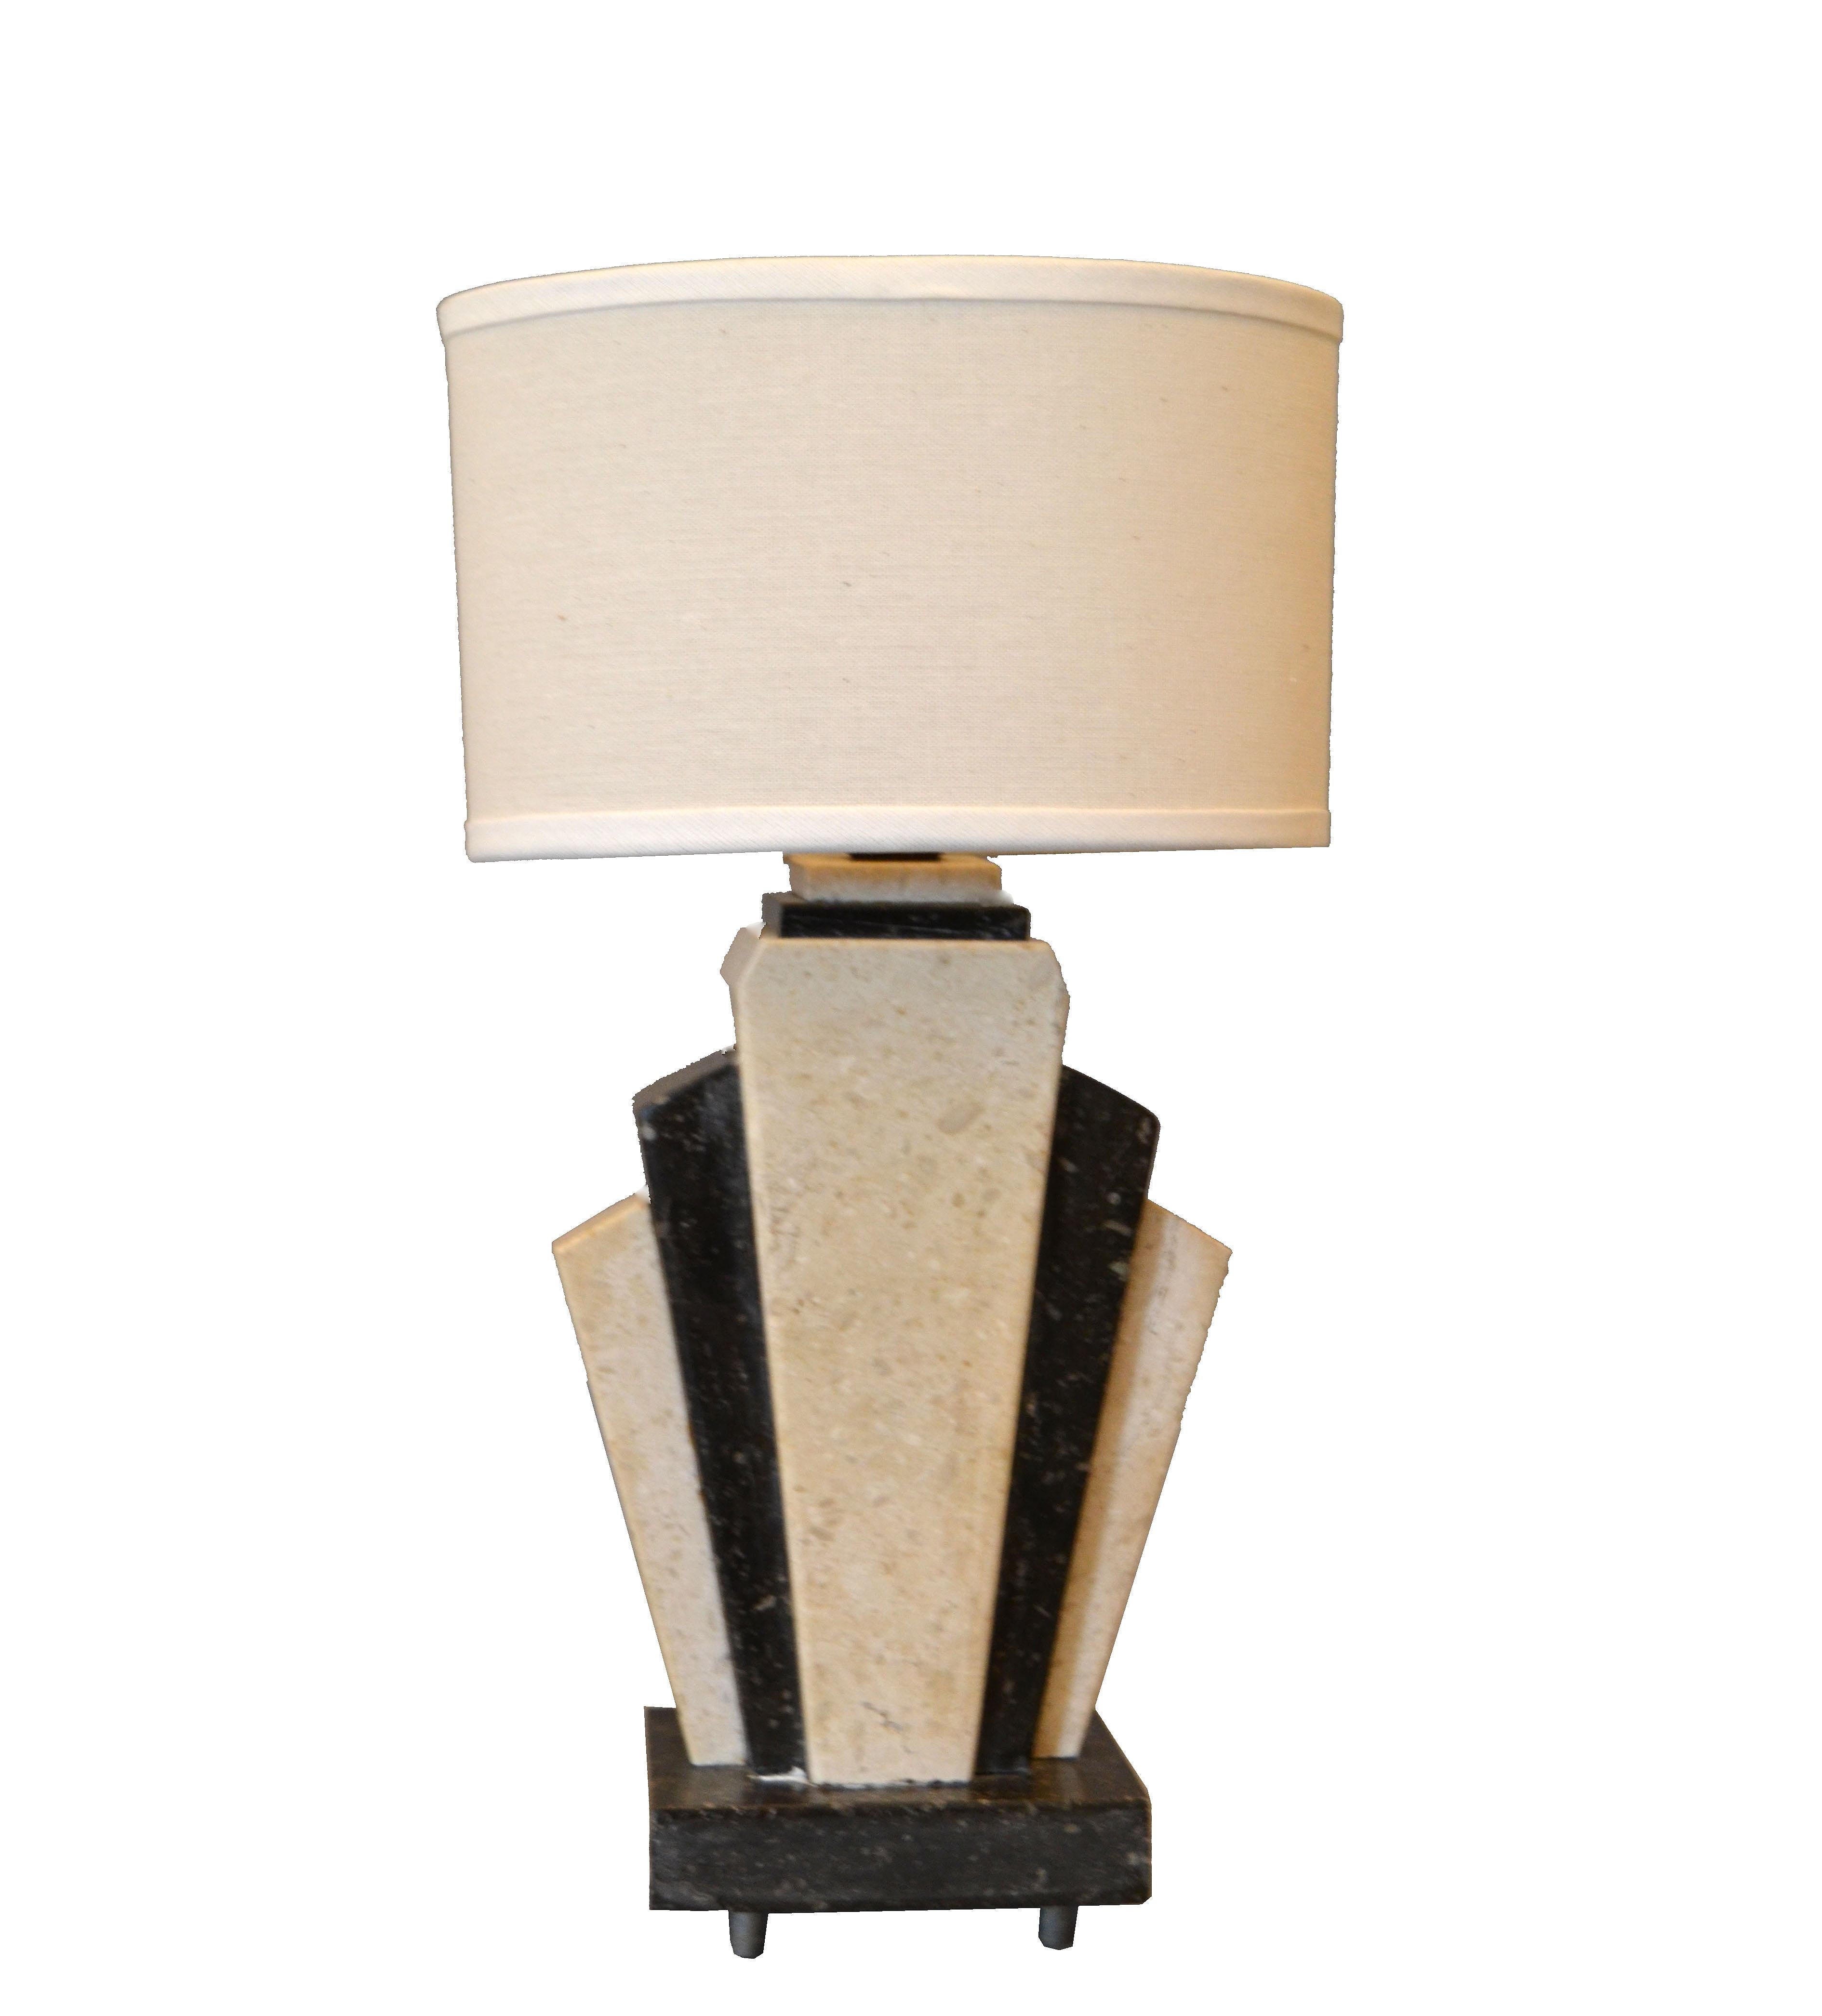 Petite Art Deco Italian Marble Bedside Table Lamp with Oval Shade 4